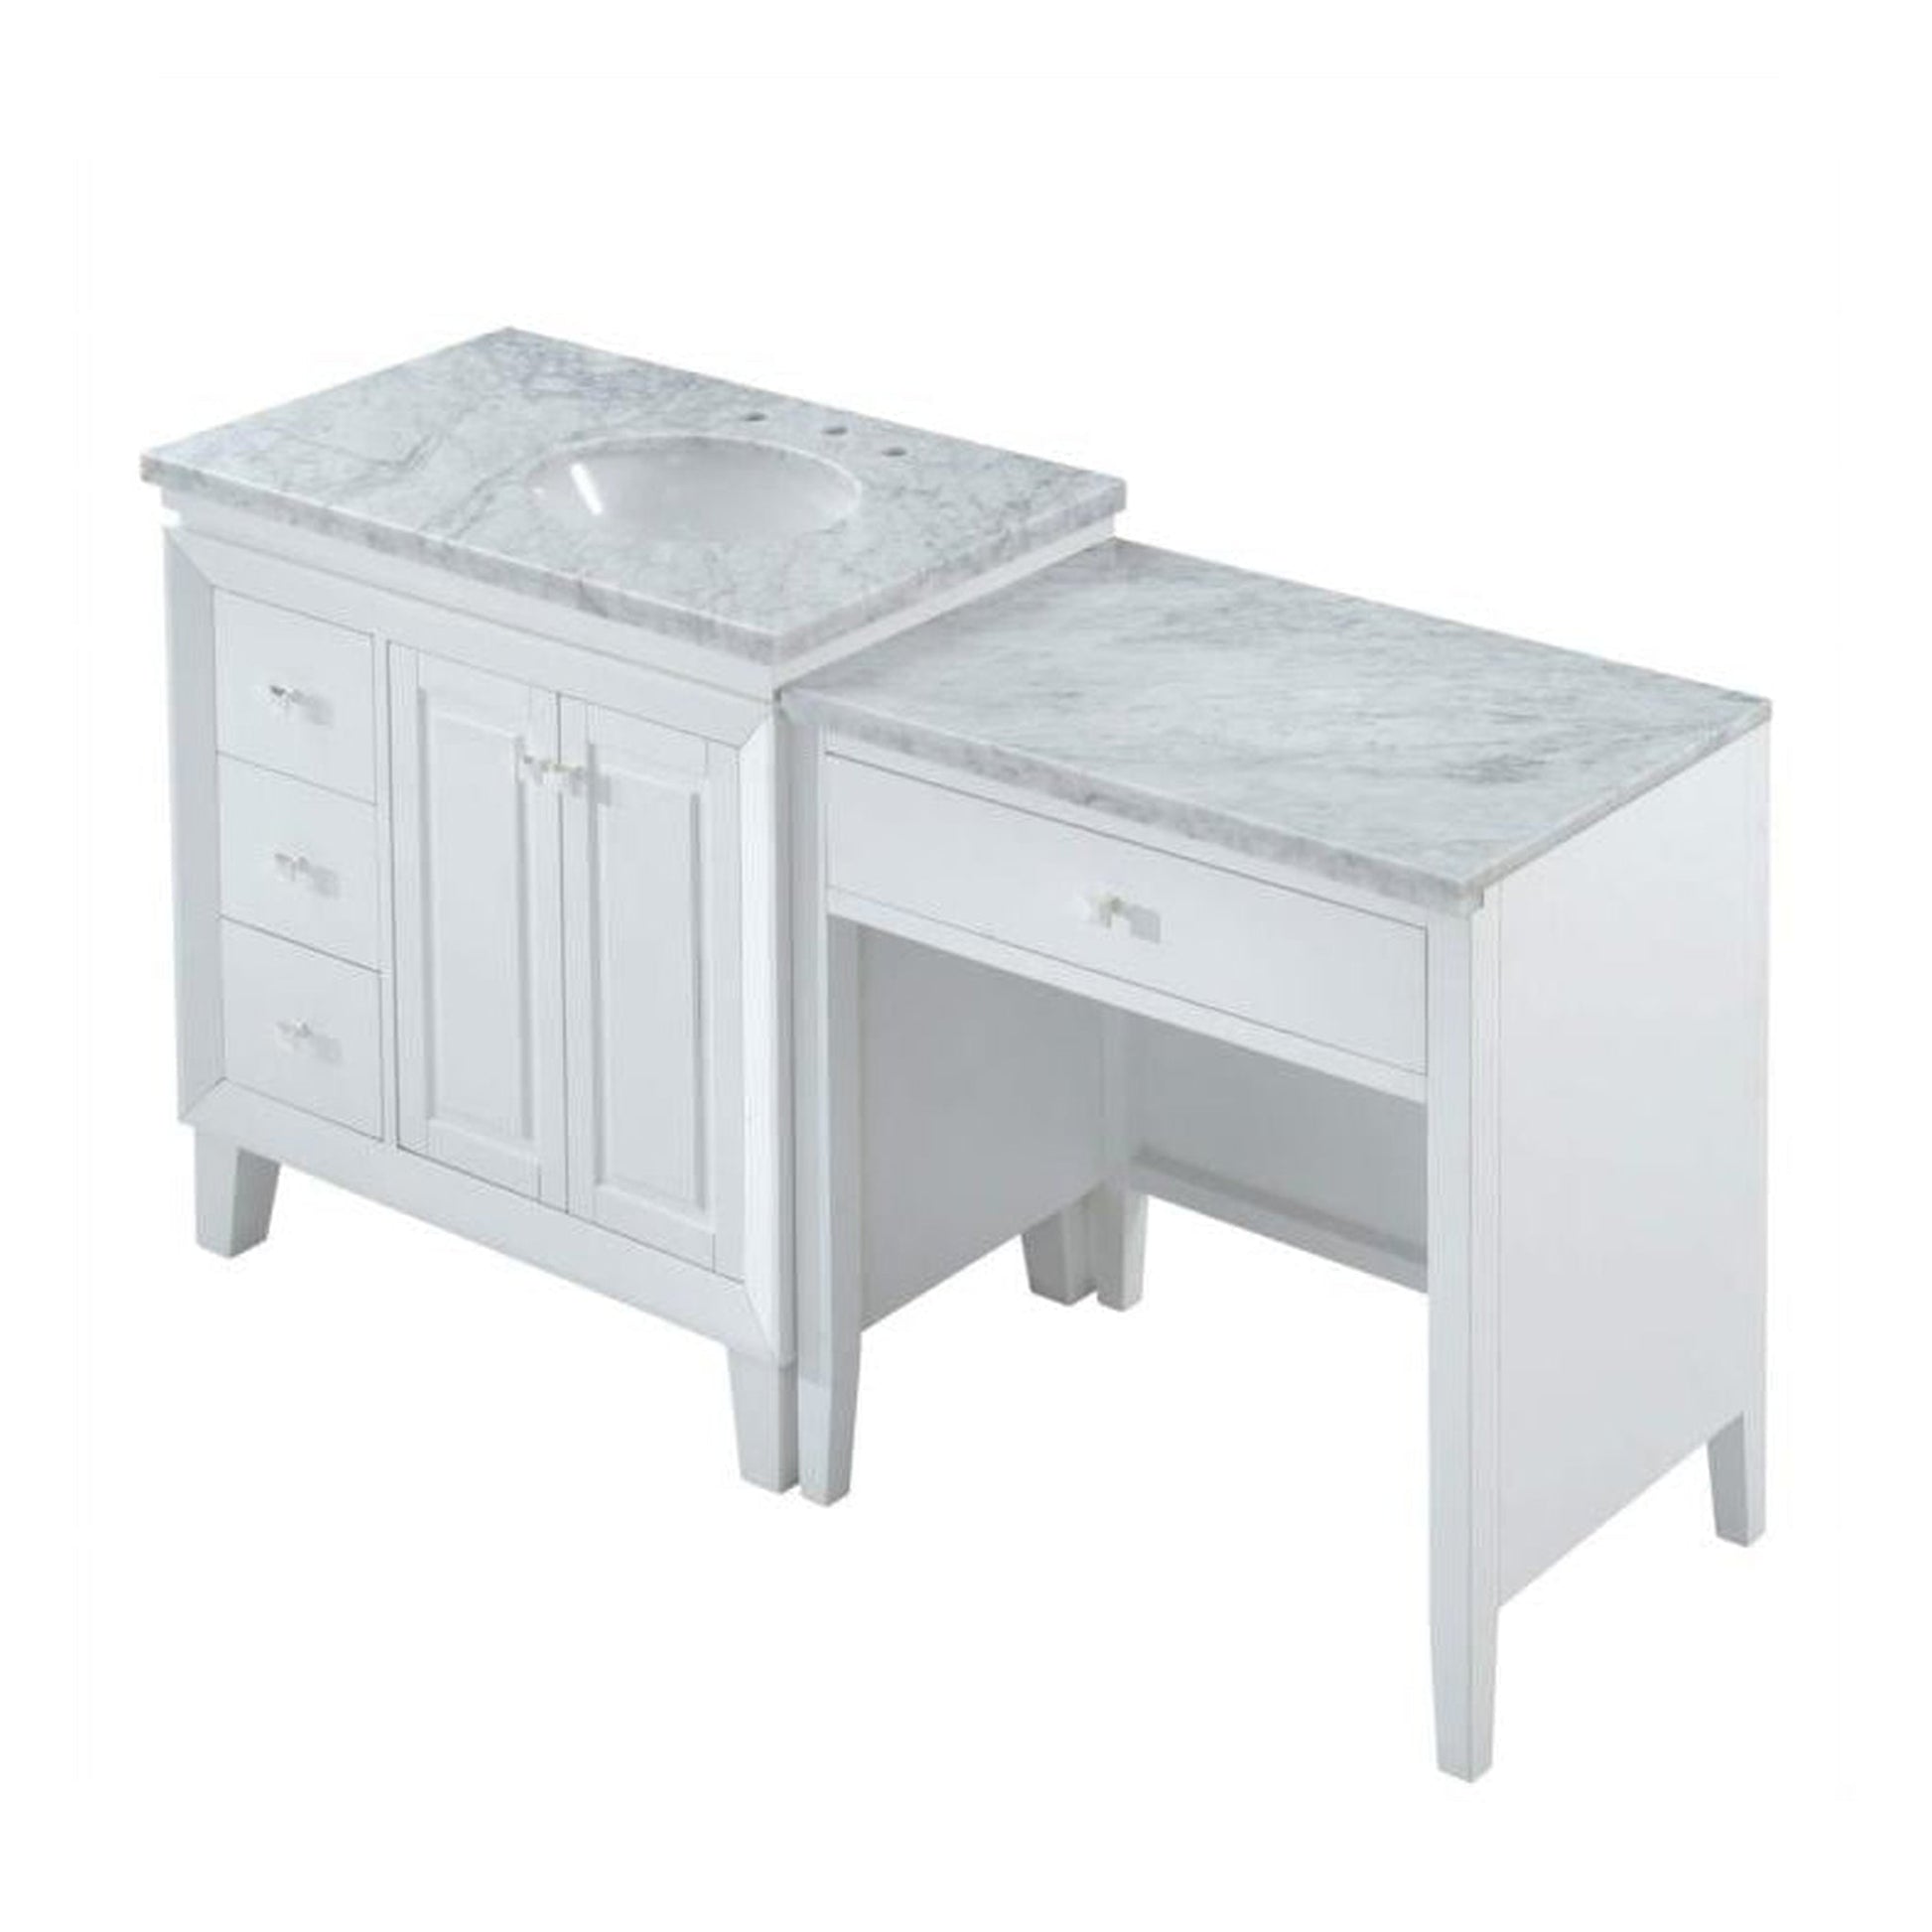 Silkroad Exclusive 67" Single Left Sink White Modular Bathroom Vanity With Carrara White Marble Countertop and White Ceramic Undermount Sink